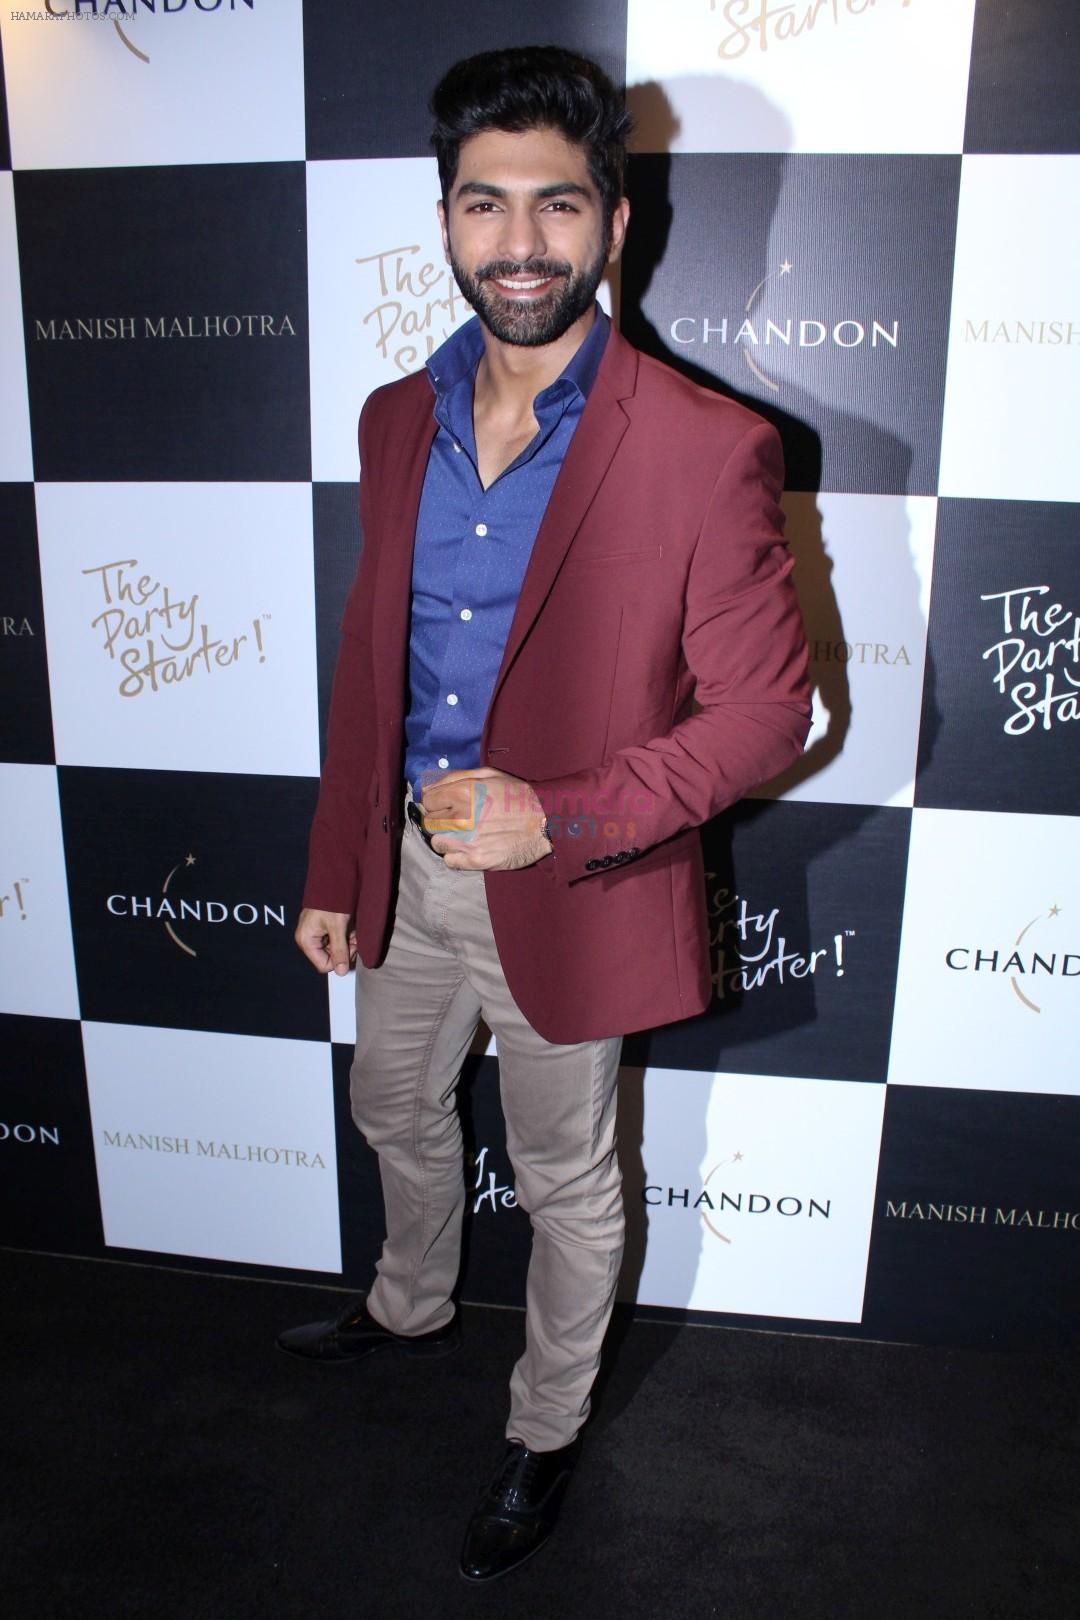 Taaha Shah at Moet & Chandon and Manish Malhotra�s bash at The Party Starter on 9th Oct 2017